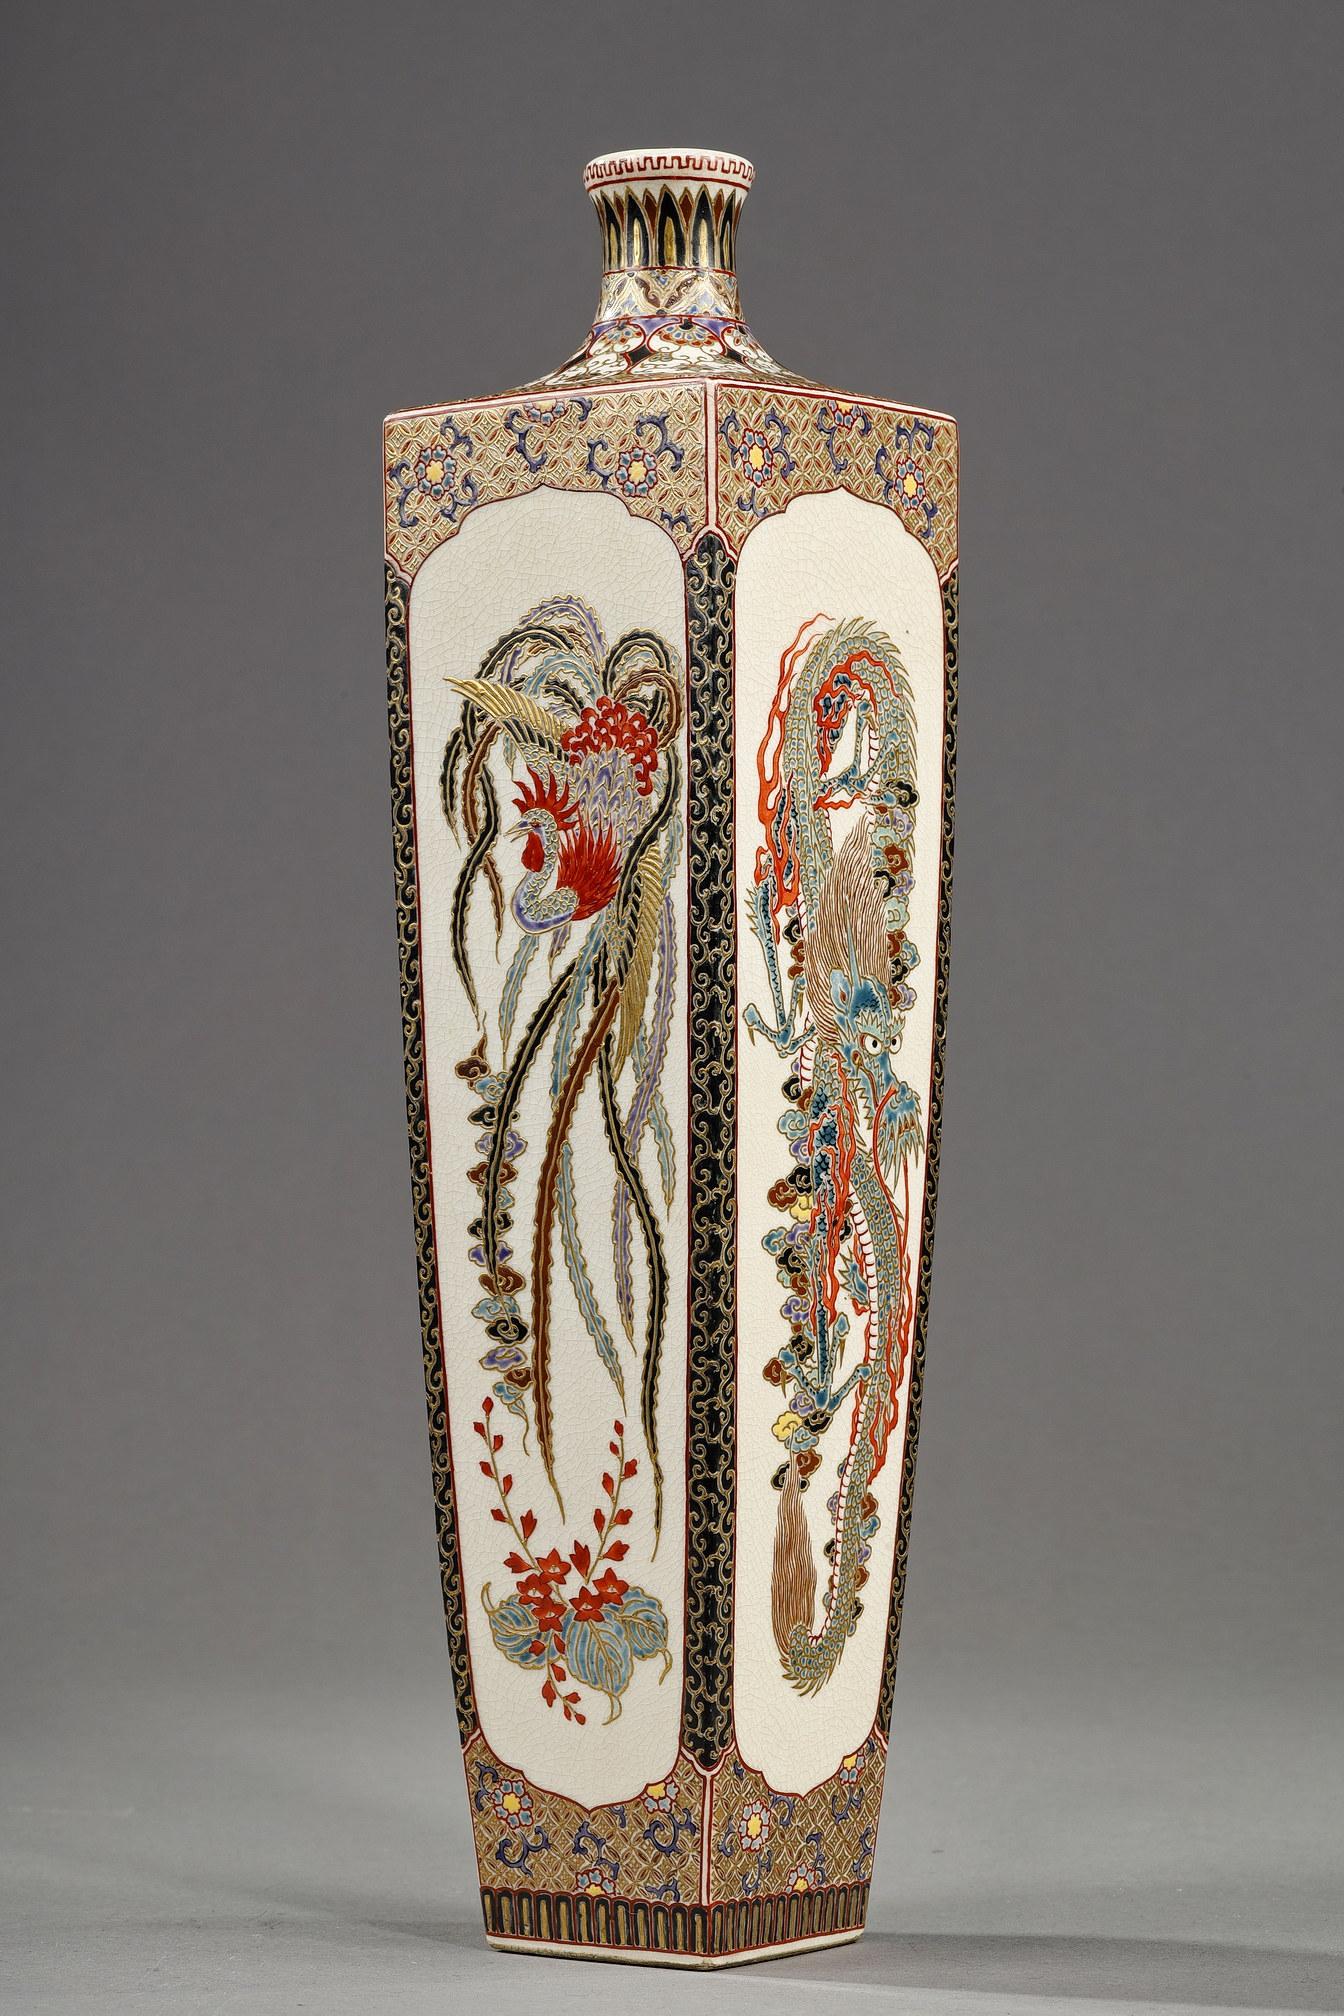 A beautiful and rare quadrangular earthenware soliflore vase with polychrome enamel and gold rakan decoration, decorated on the sides with dragons and phoenixes in particularly vivid colors in a frame of flowers and arabesques. Satsuma mark on